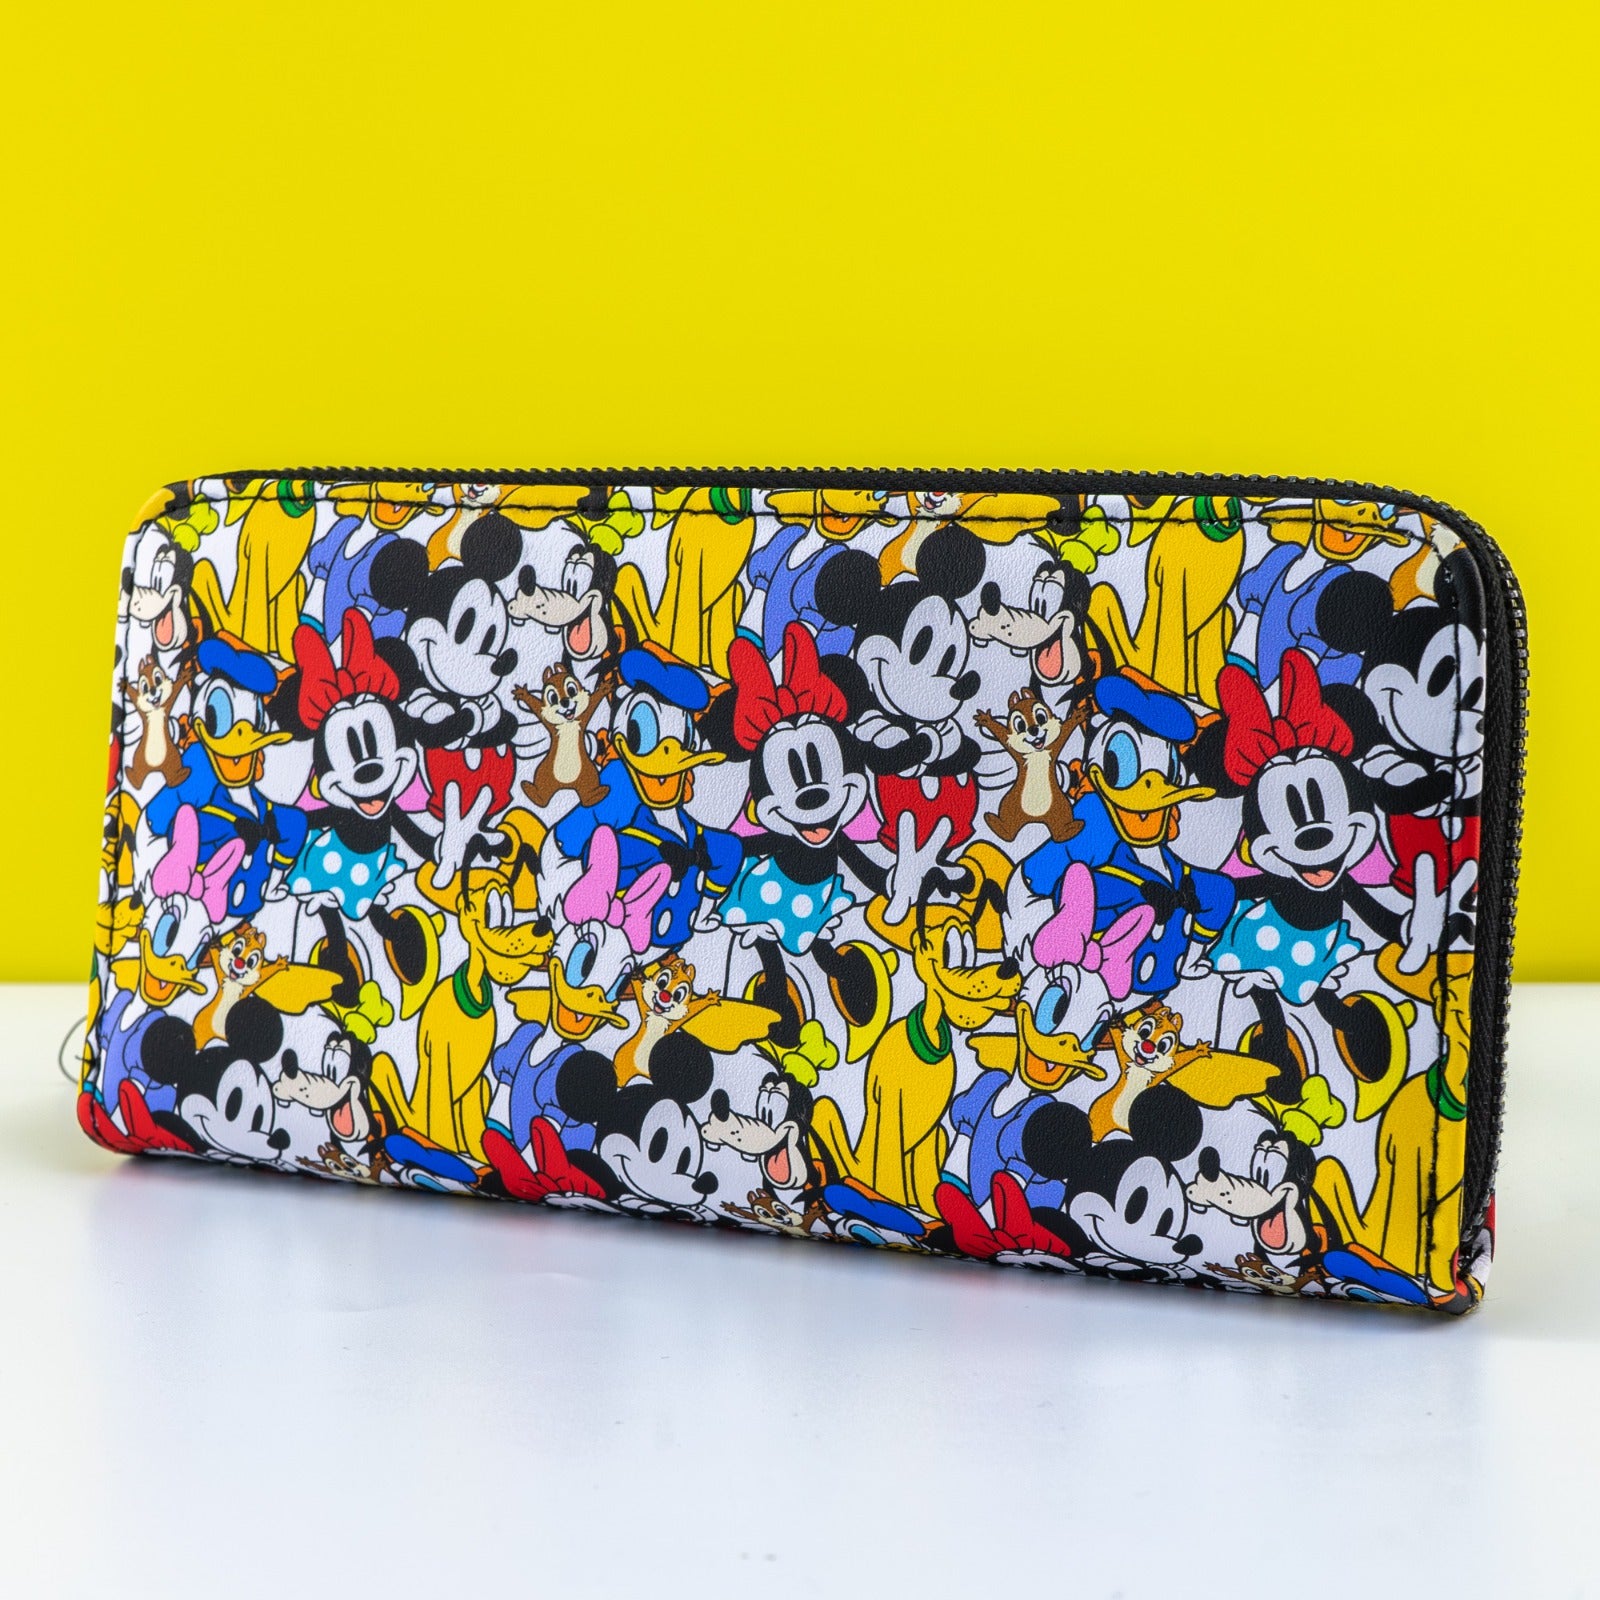 Loungefly x Disney Mickey and Friends Purse